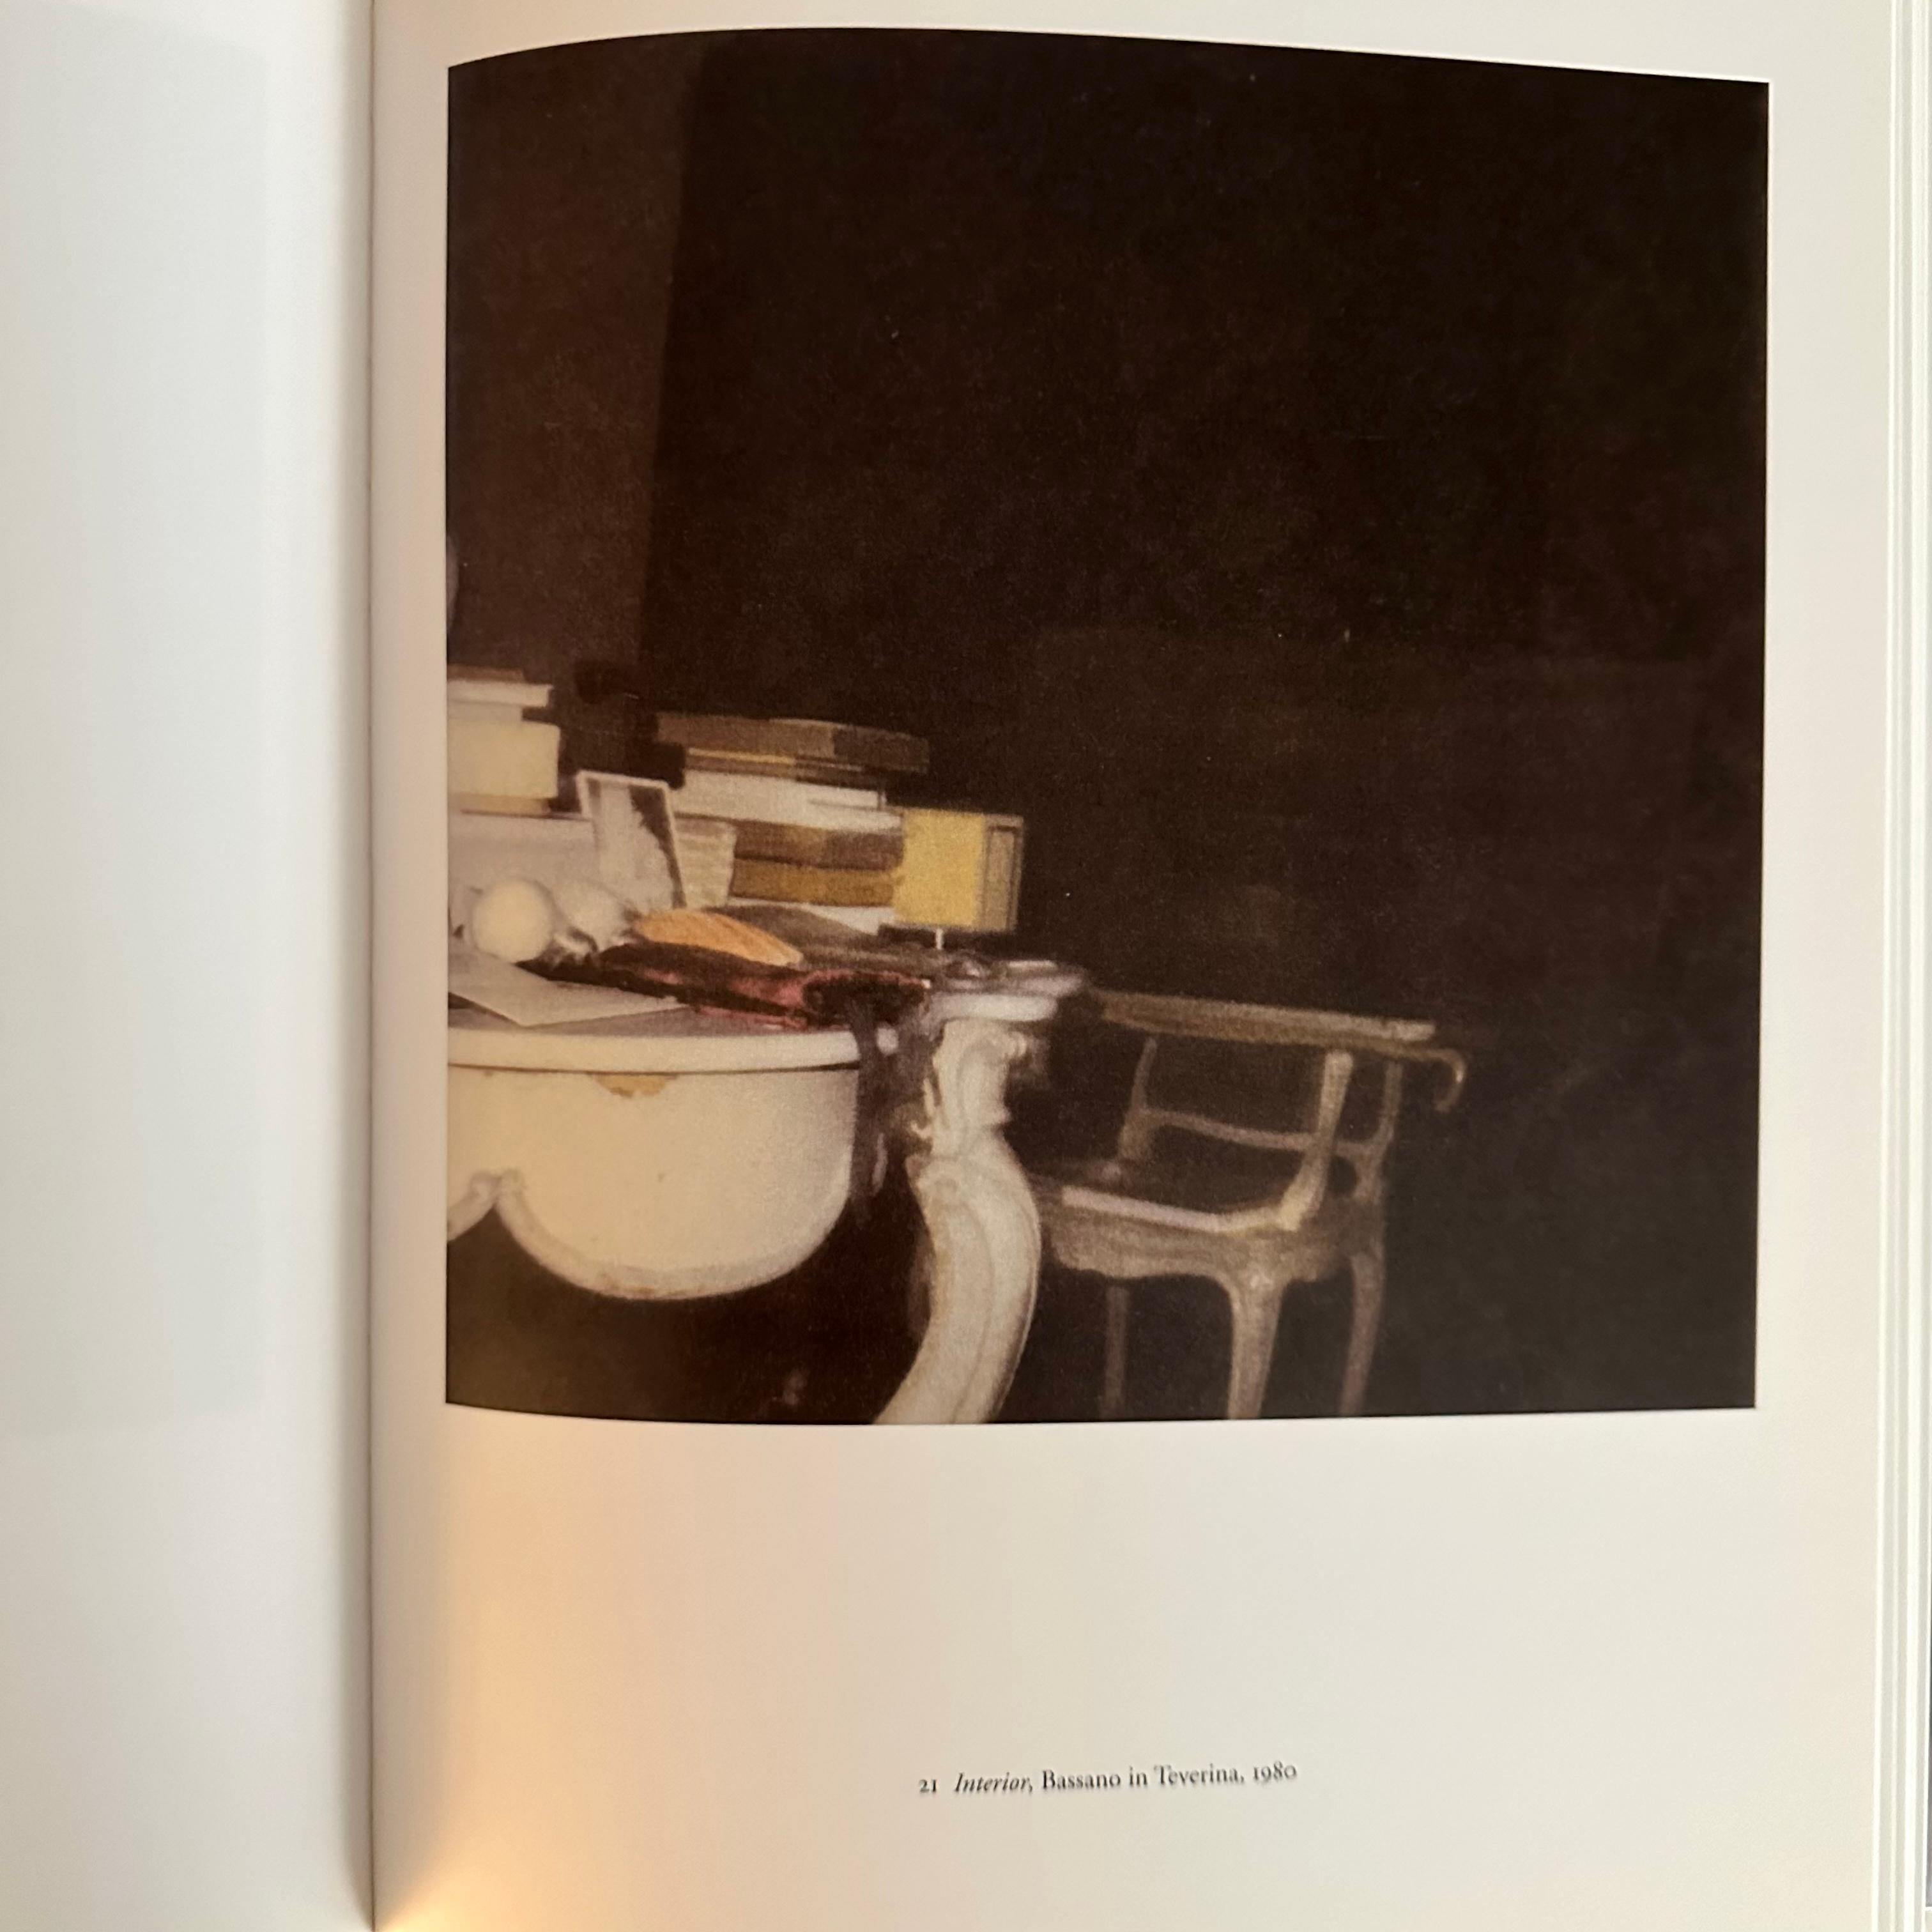 Published by Schirmer Mosel, 1st edition, Germany, 2008. Hardback with German and English text. 

Cy Twombly, a name that needs no introduction. Twombly is widely revered for his large-scale abstract expressionist works, although he has always been